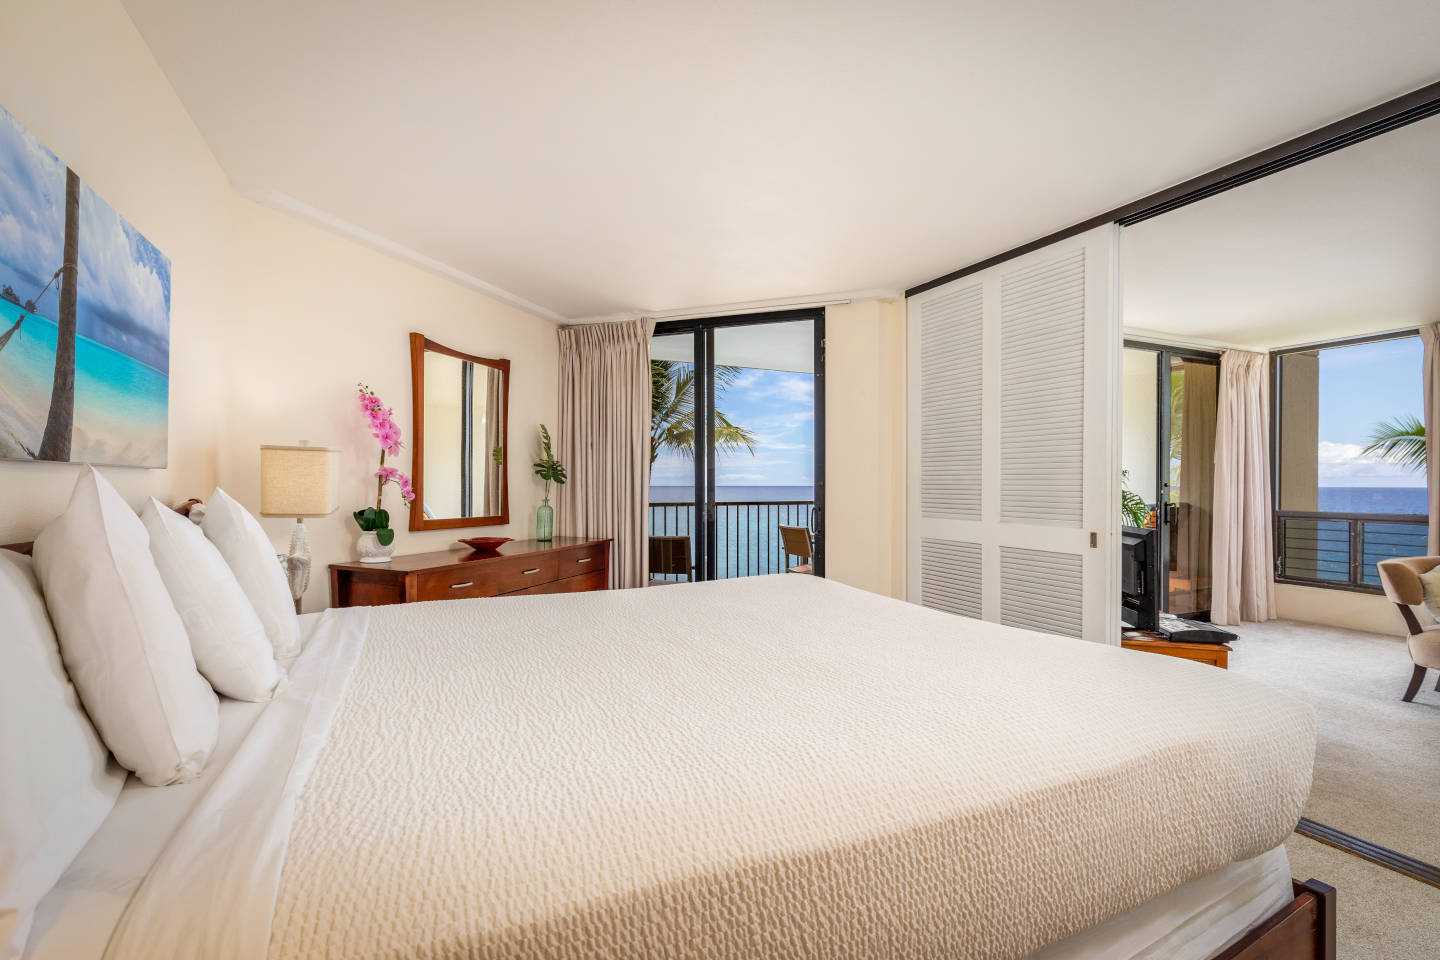 Master bedroom with king bed, dresser with orchid plant, balcony overlooking the ocean and sliding doors to living room